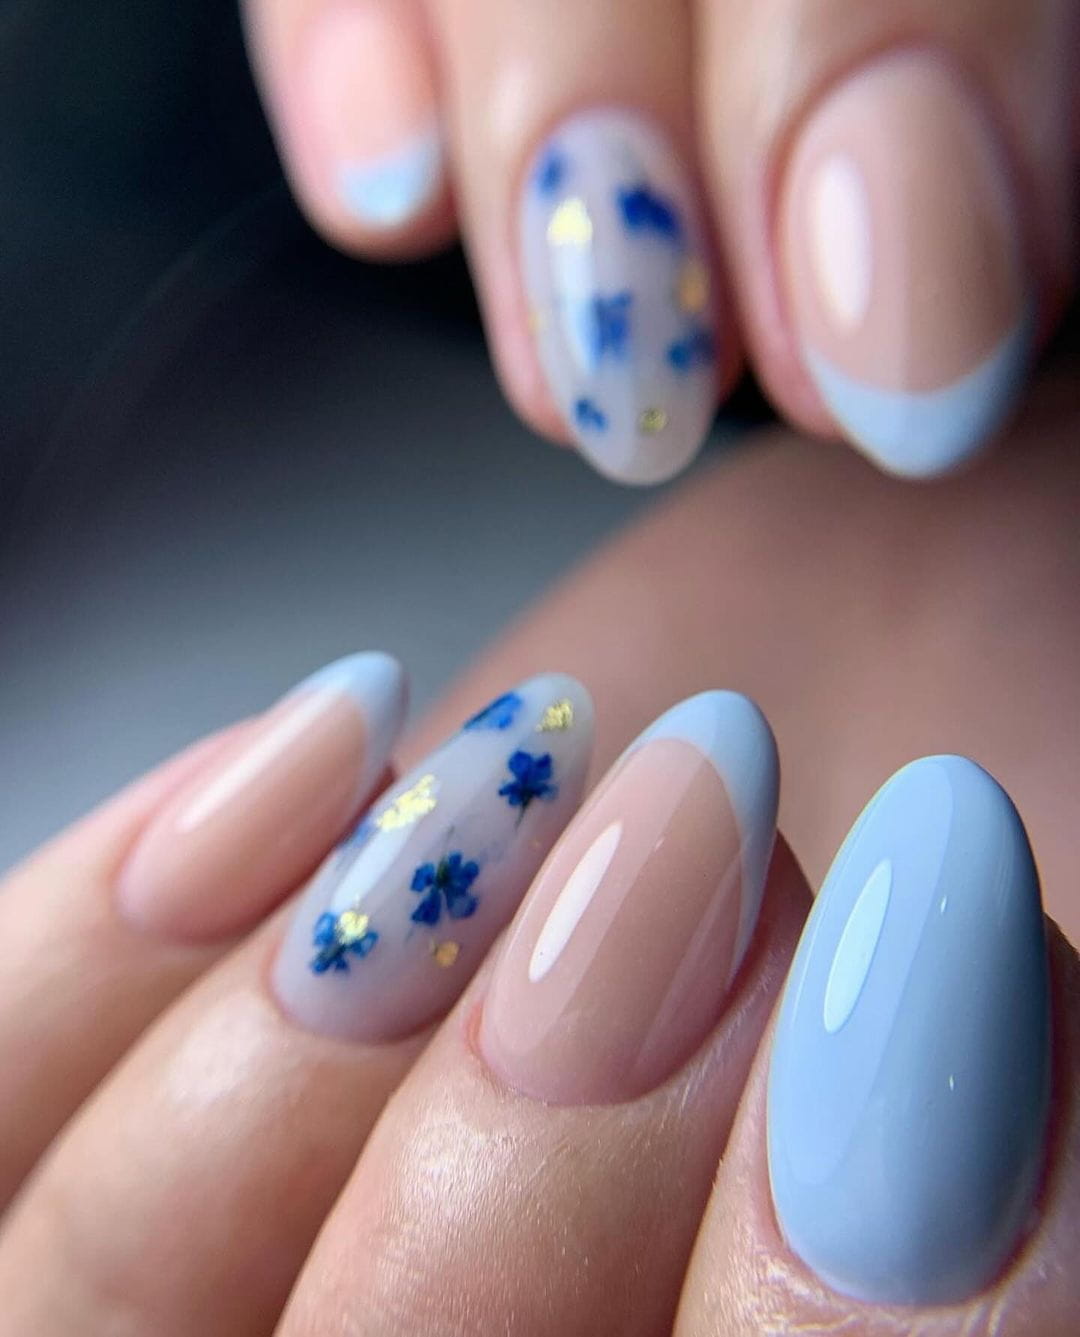 100 Pretty Spring Nail Designs To Try This Year images 55